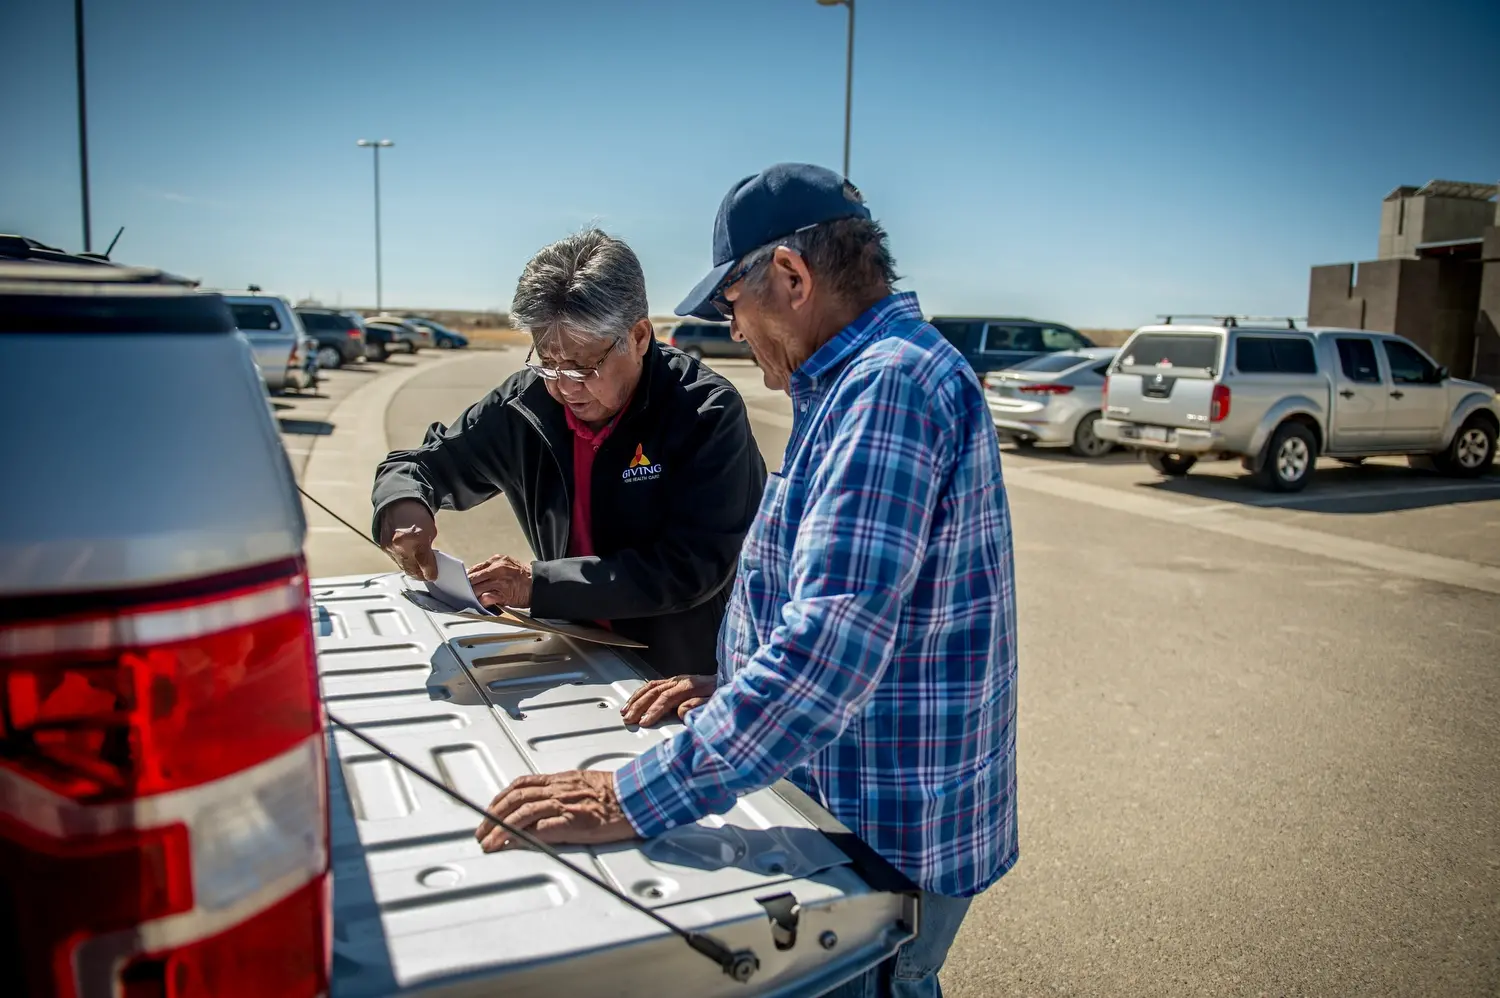 Phil Harrison, left, is pictured assisting a former miner in filing a claim through the Radiation Exposure Compensation Act in a parking lot. Image by Mary F. Calvert. United States, 2020.